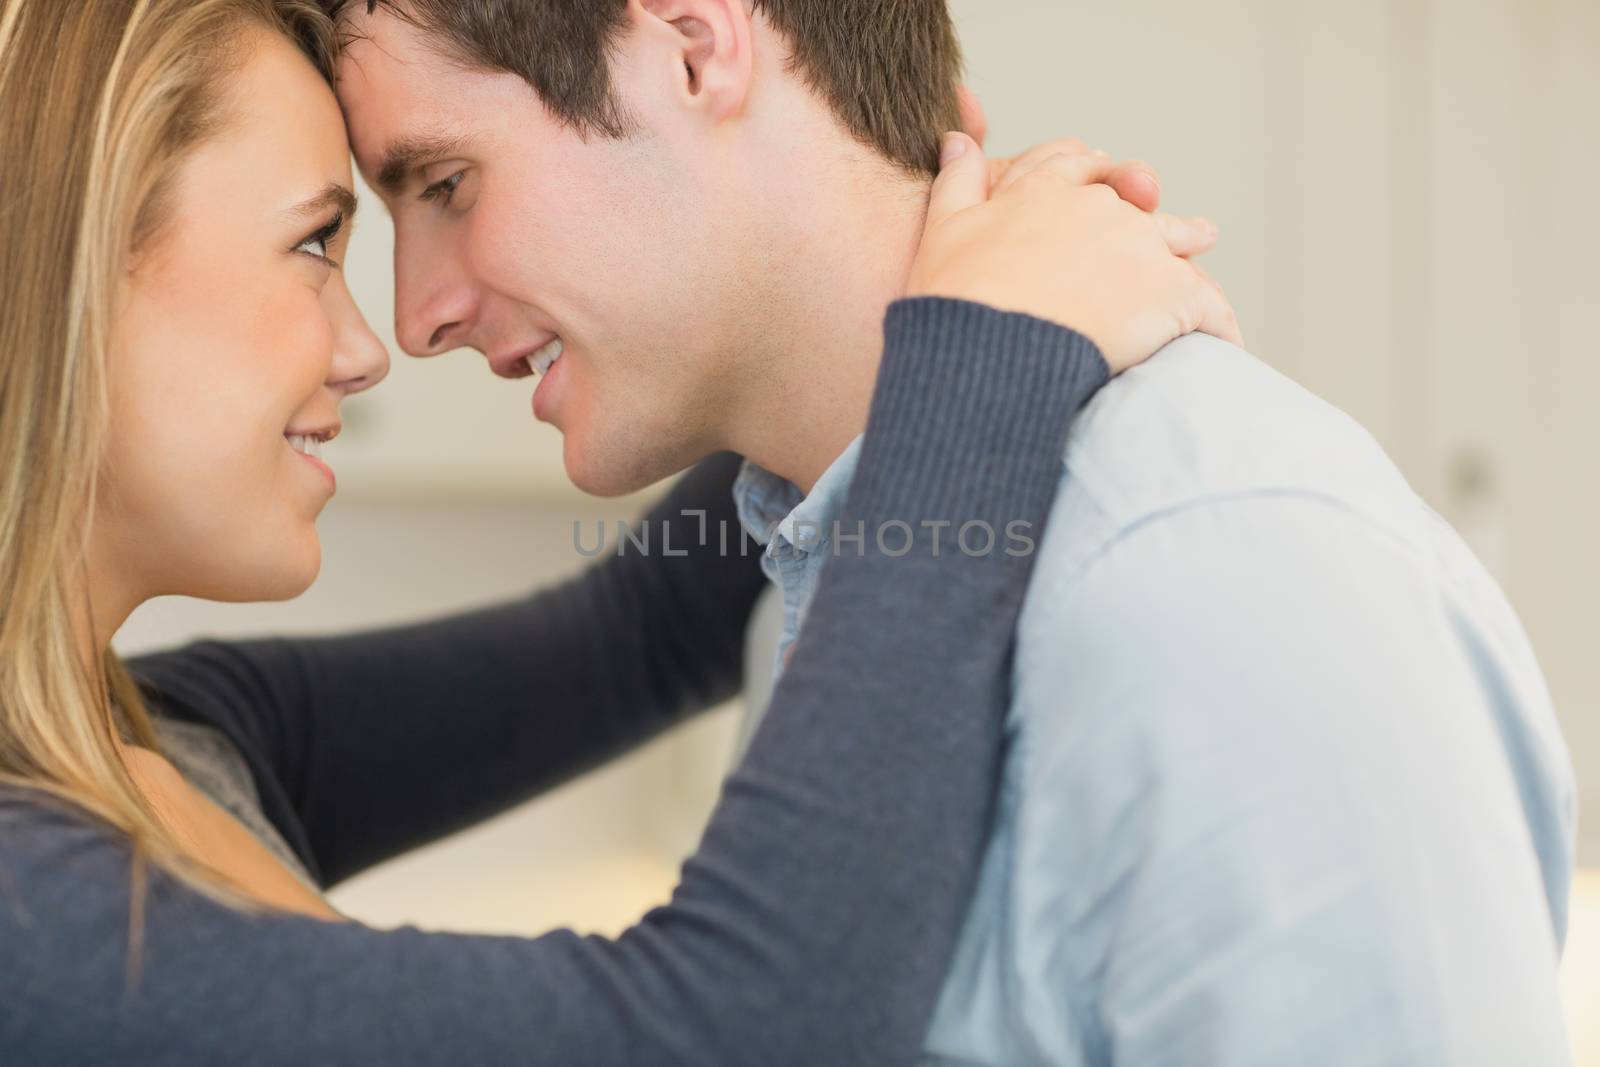 Woman and man looking into each others eyes lovingly